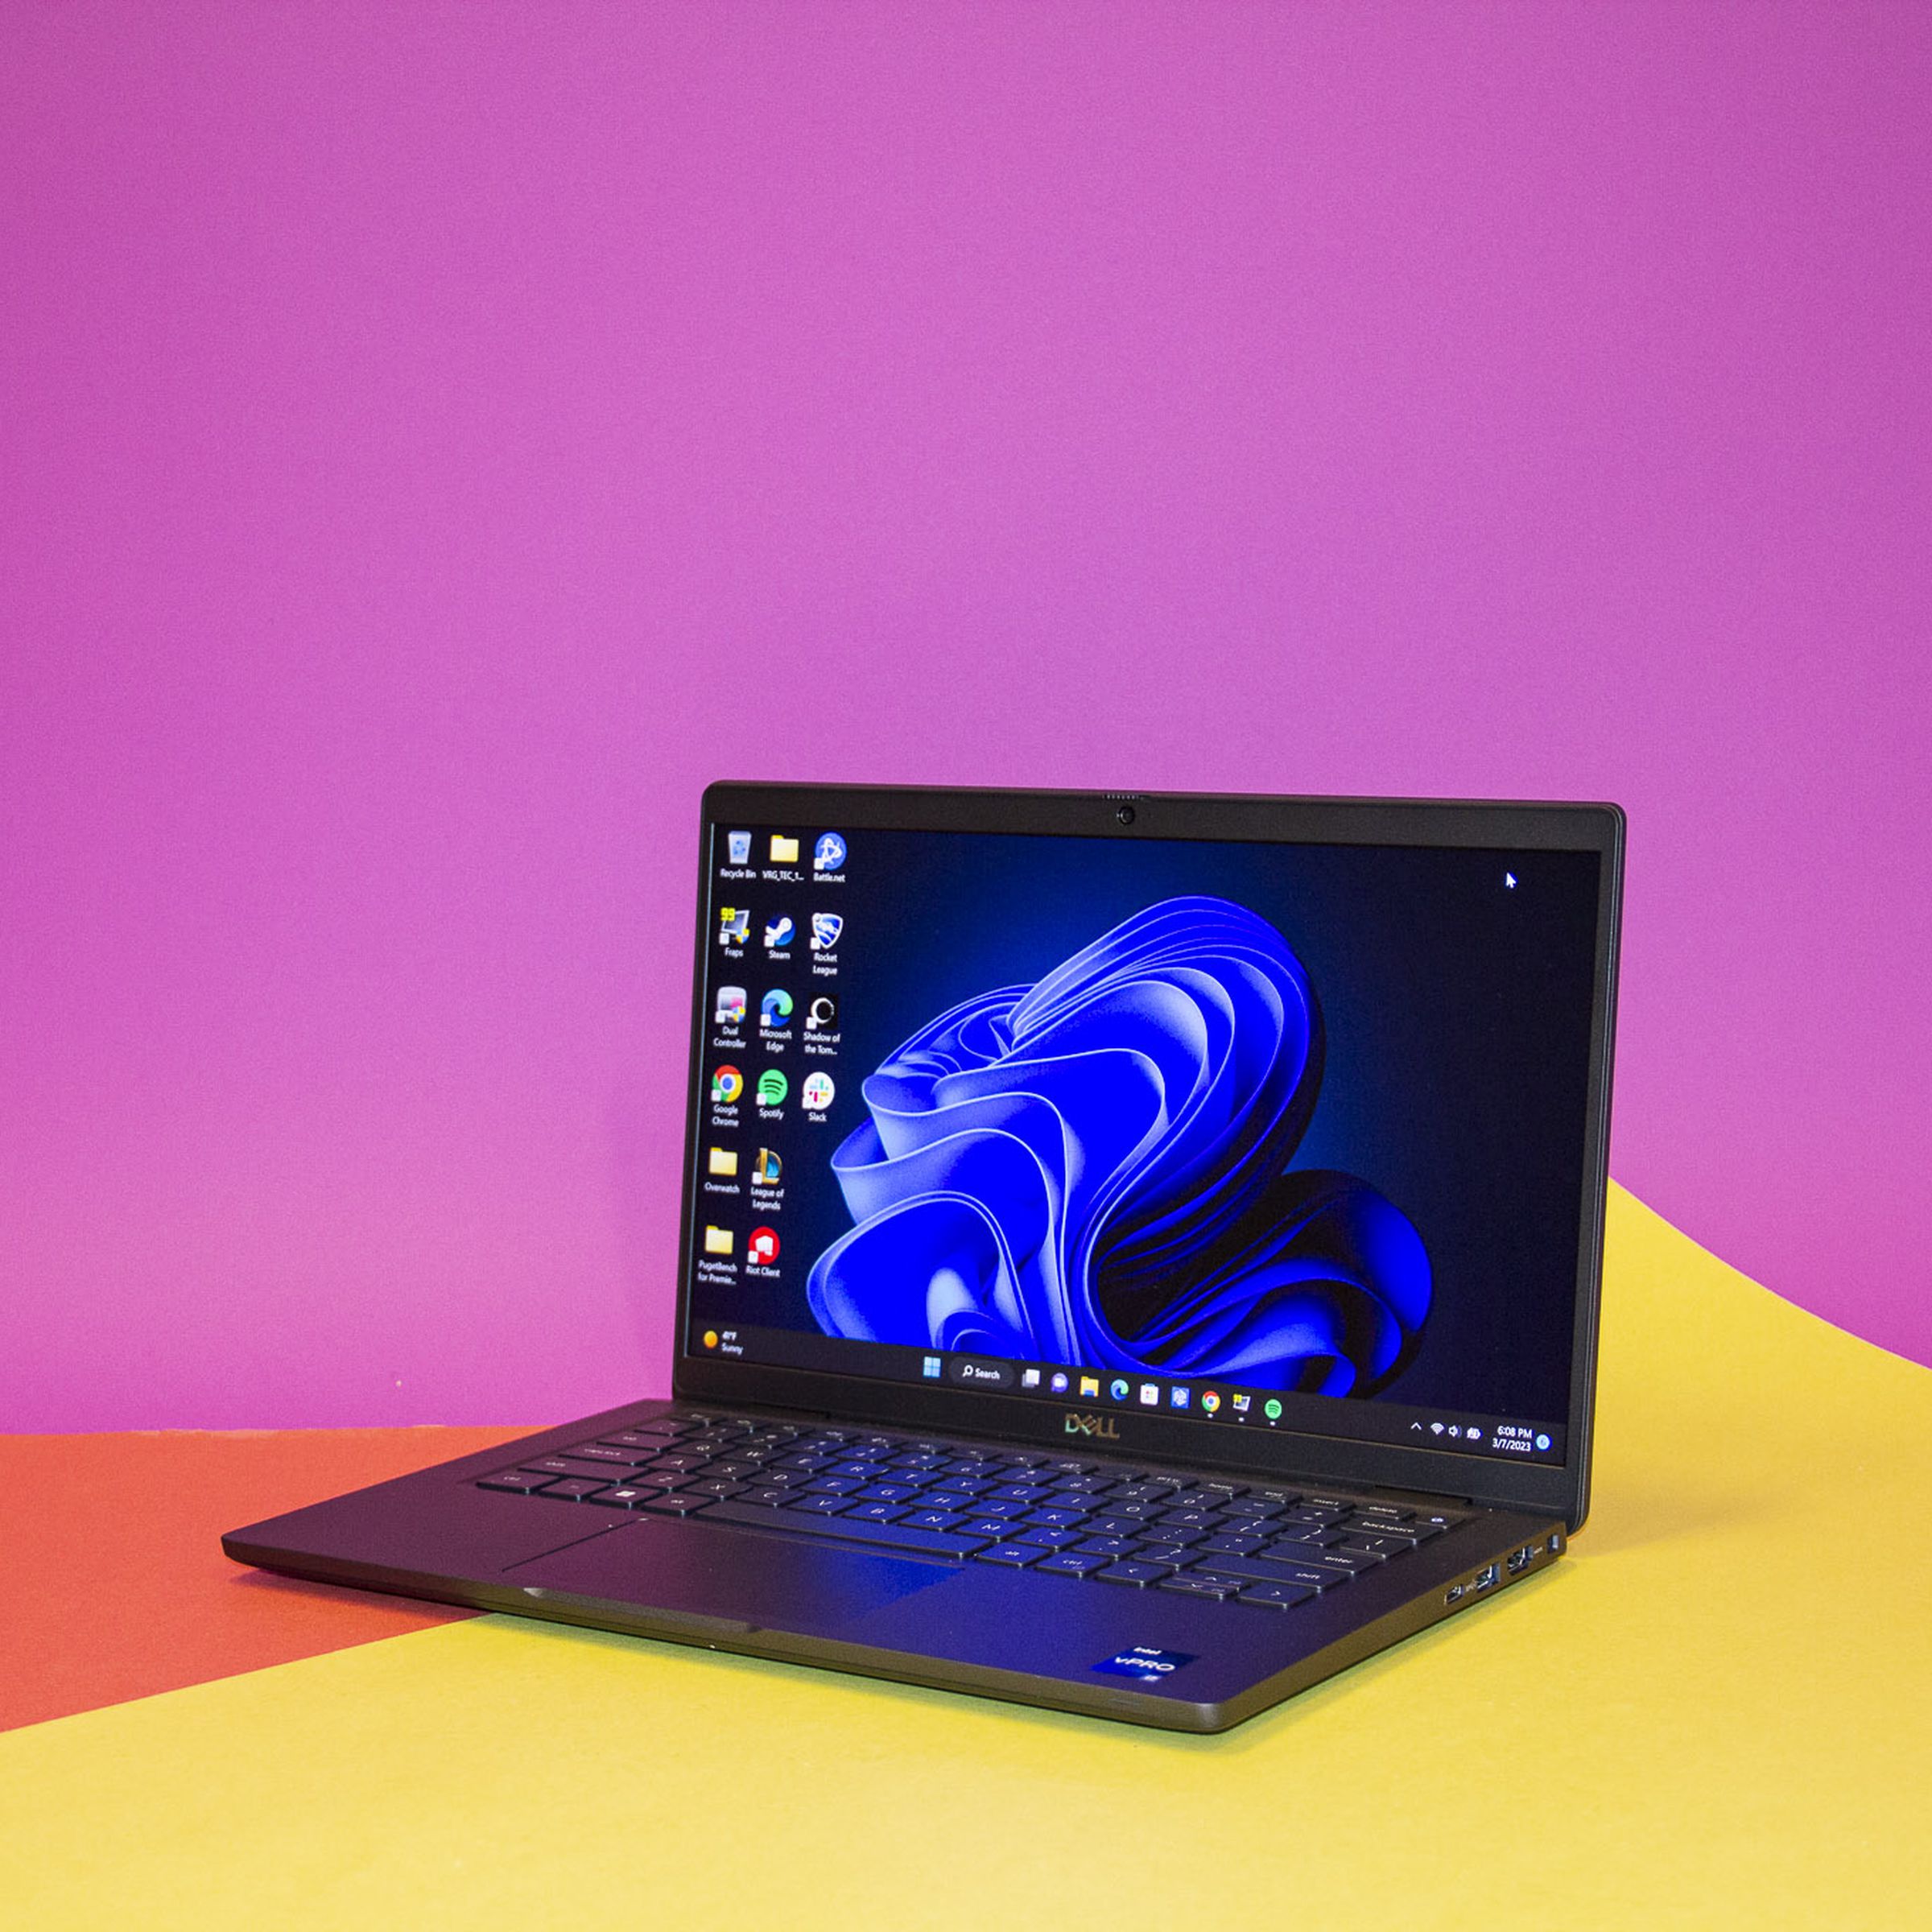 The Dell Latitude 7330 on a yellow and pink background open and angled to the left.